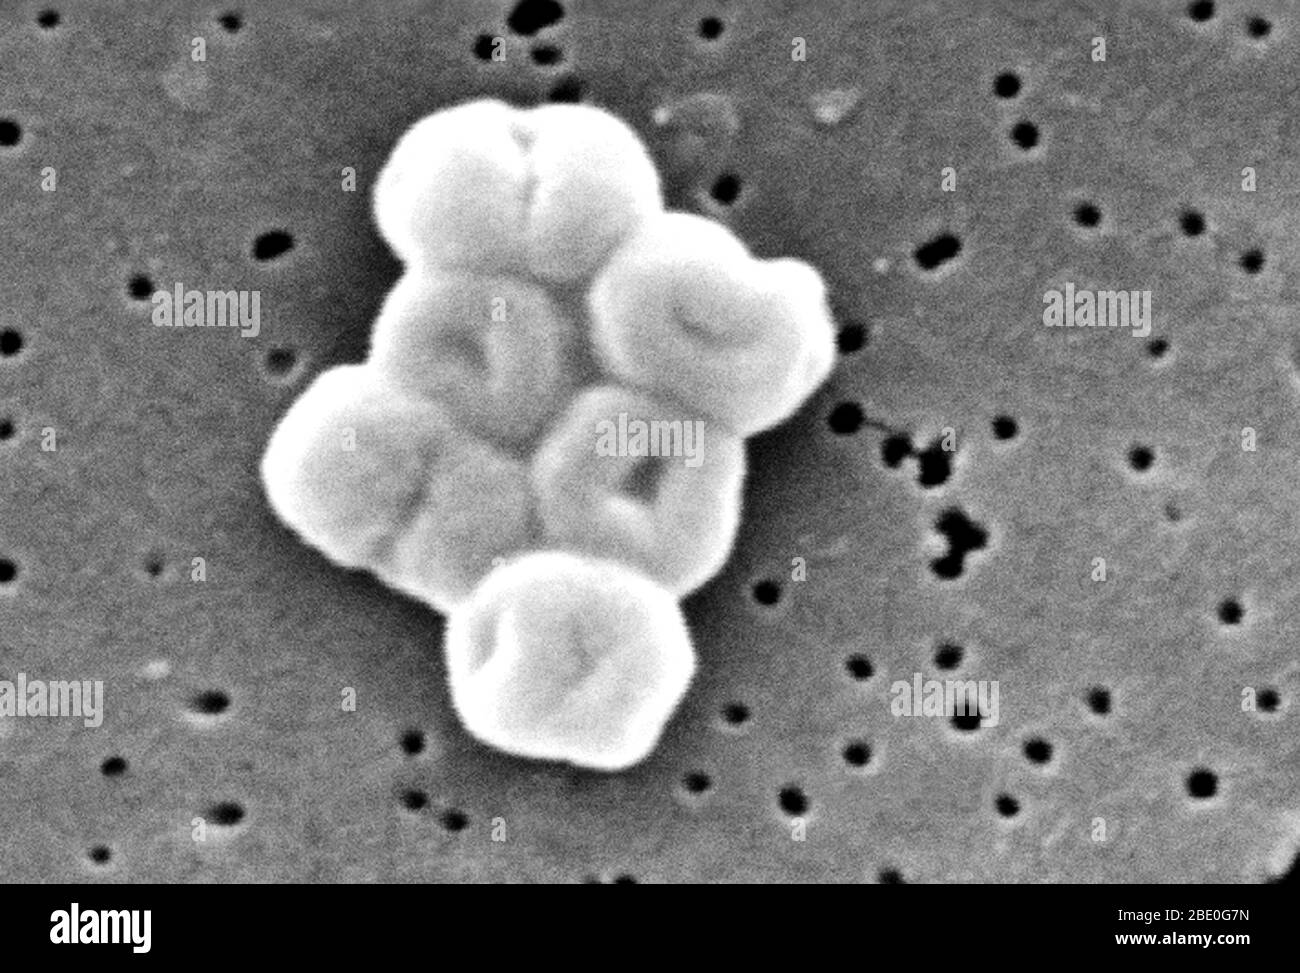 This SEM depicts a highly magnified cluster of Gram-negative, non-motile Acinetobacter baumannii bacteria; Mag - 27600x. Members of the genus Acinetobacter are nonmotile rods, 1-1.5µm in diameter, and 1.5-2.5µm in length, becoming spherical in shape while in their stationary phase of growth. Acinetobacter spp. are widely distributed in nature, and are normal flora on the skin. Some members of the genus are important because they are an emerging cause of hospital acquired pulmonary, i.e., pneumoniae, hemopathic, and wound infections. Stock Photo